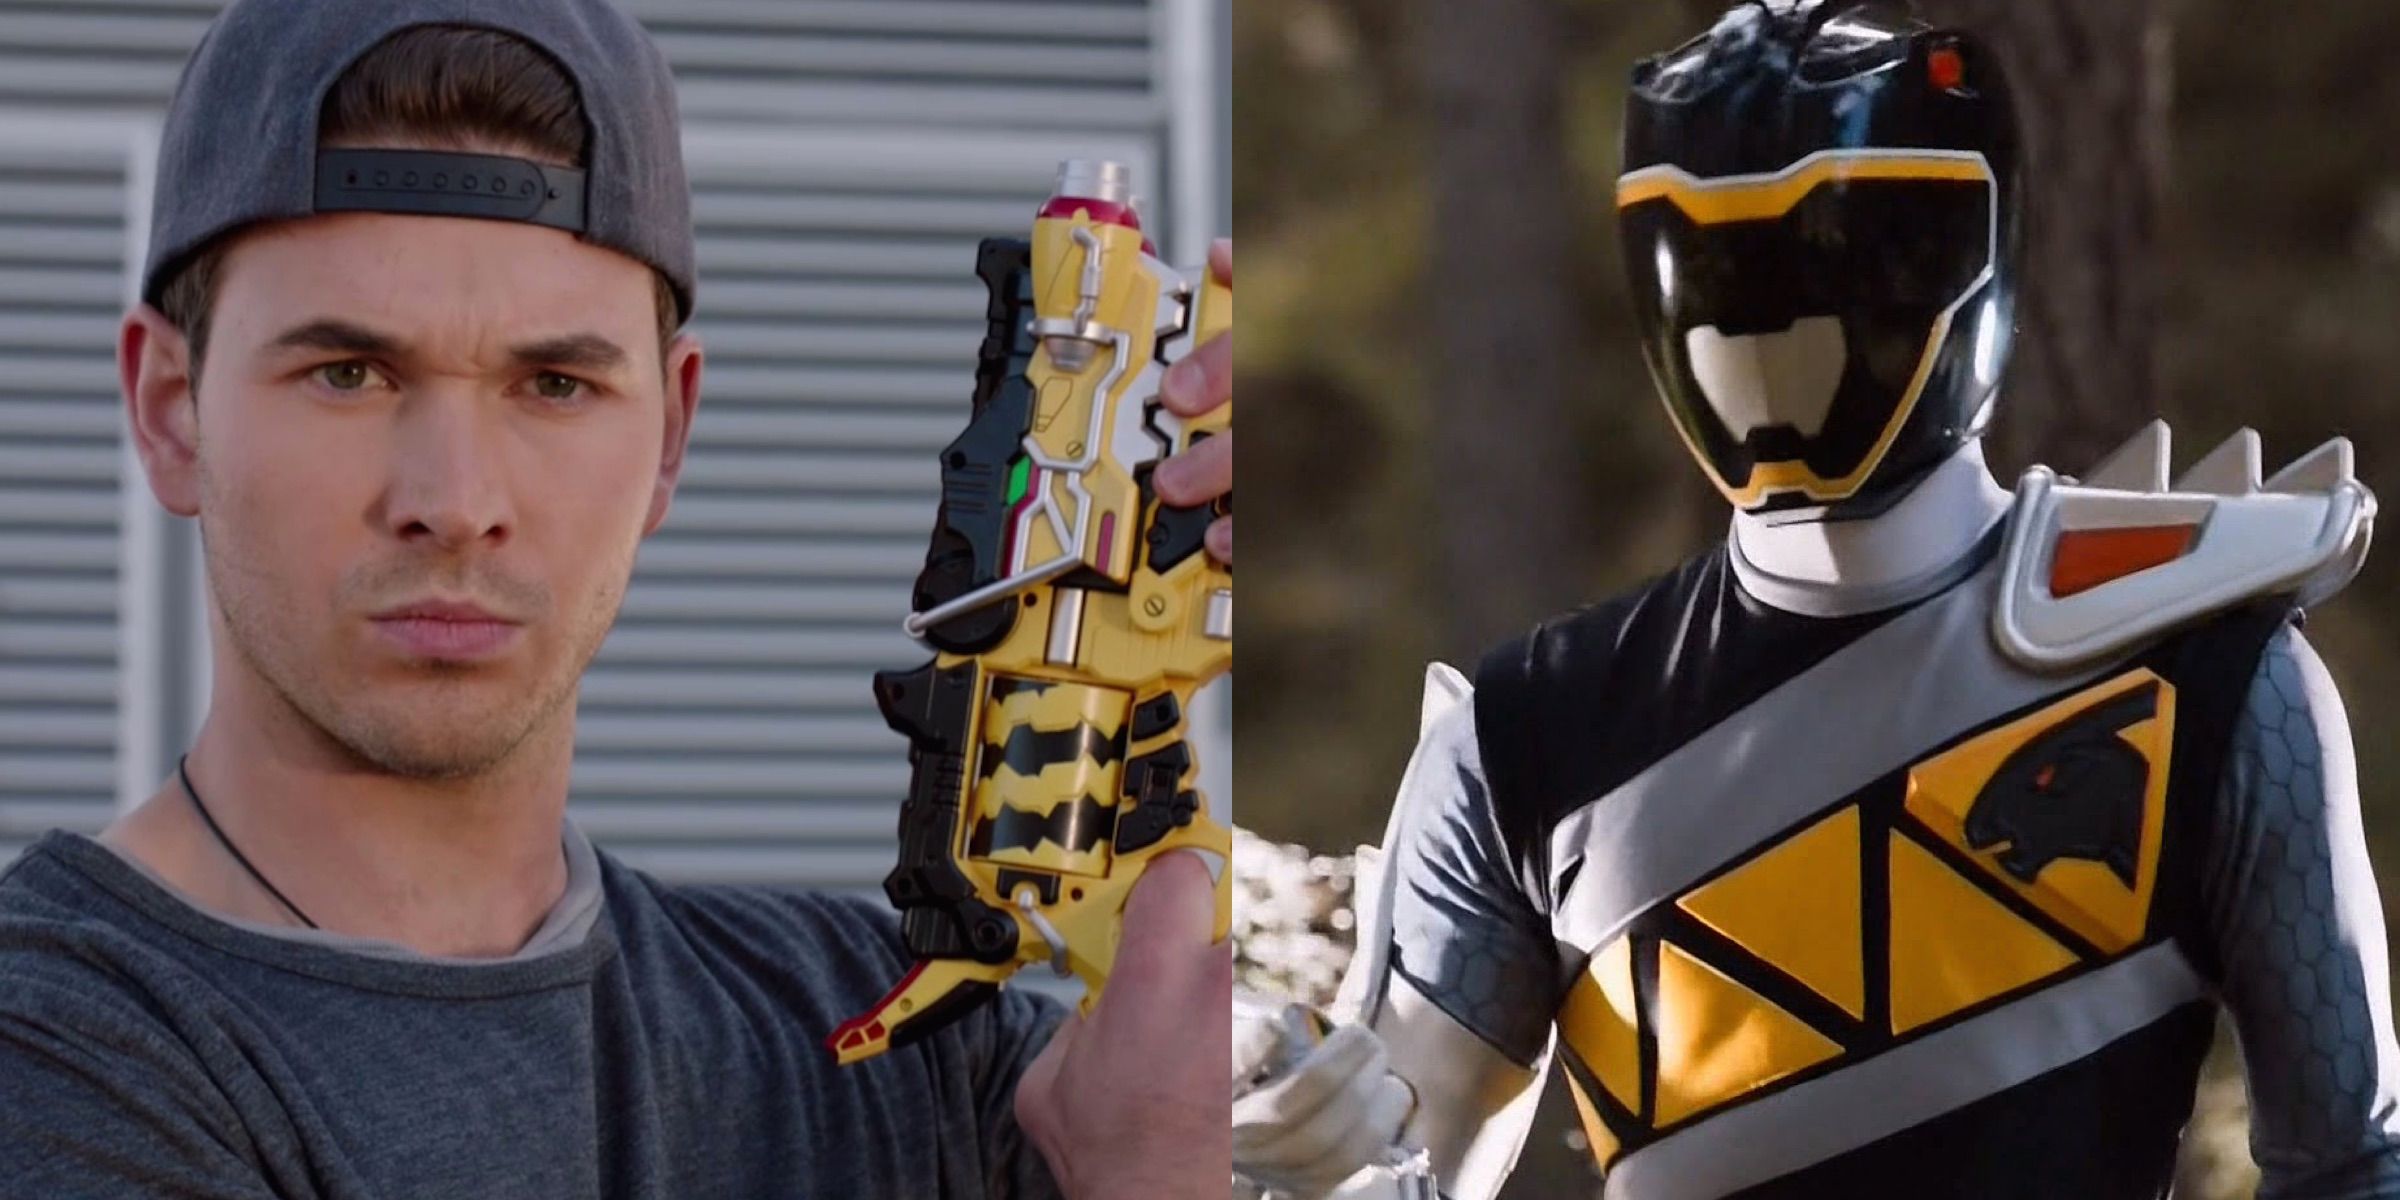 Power Rangers Which Black Ranger Are You Based On Your Zodiac Sign.